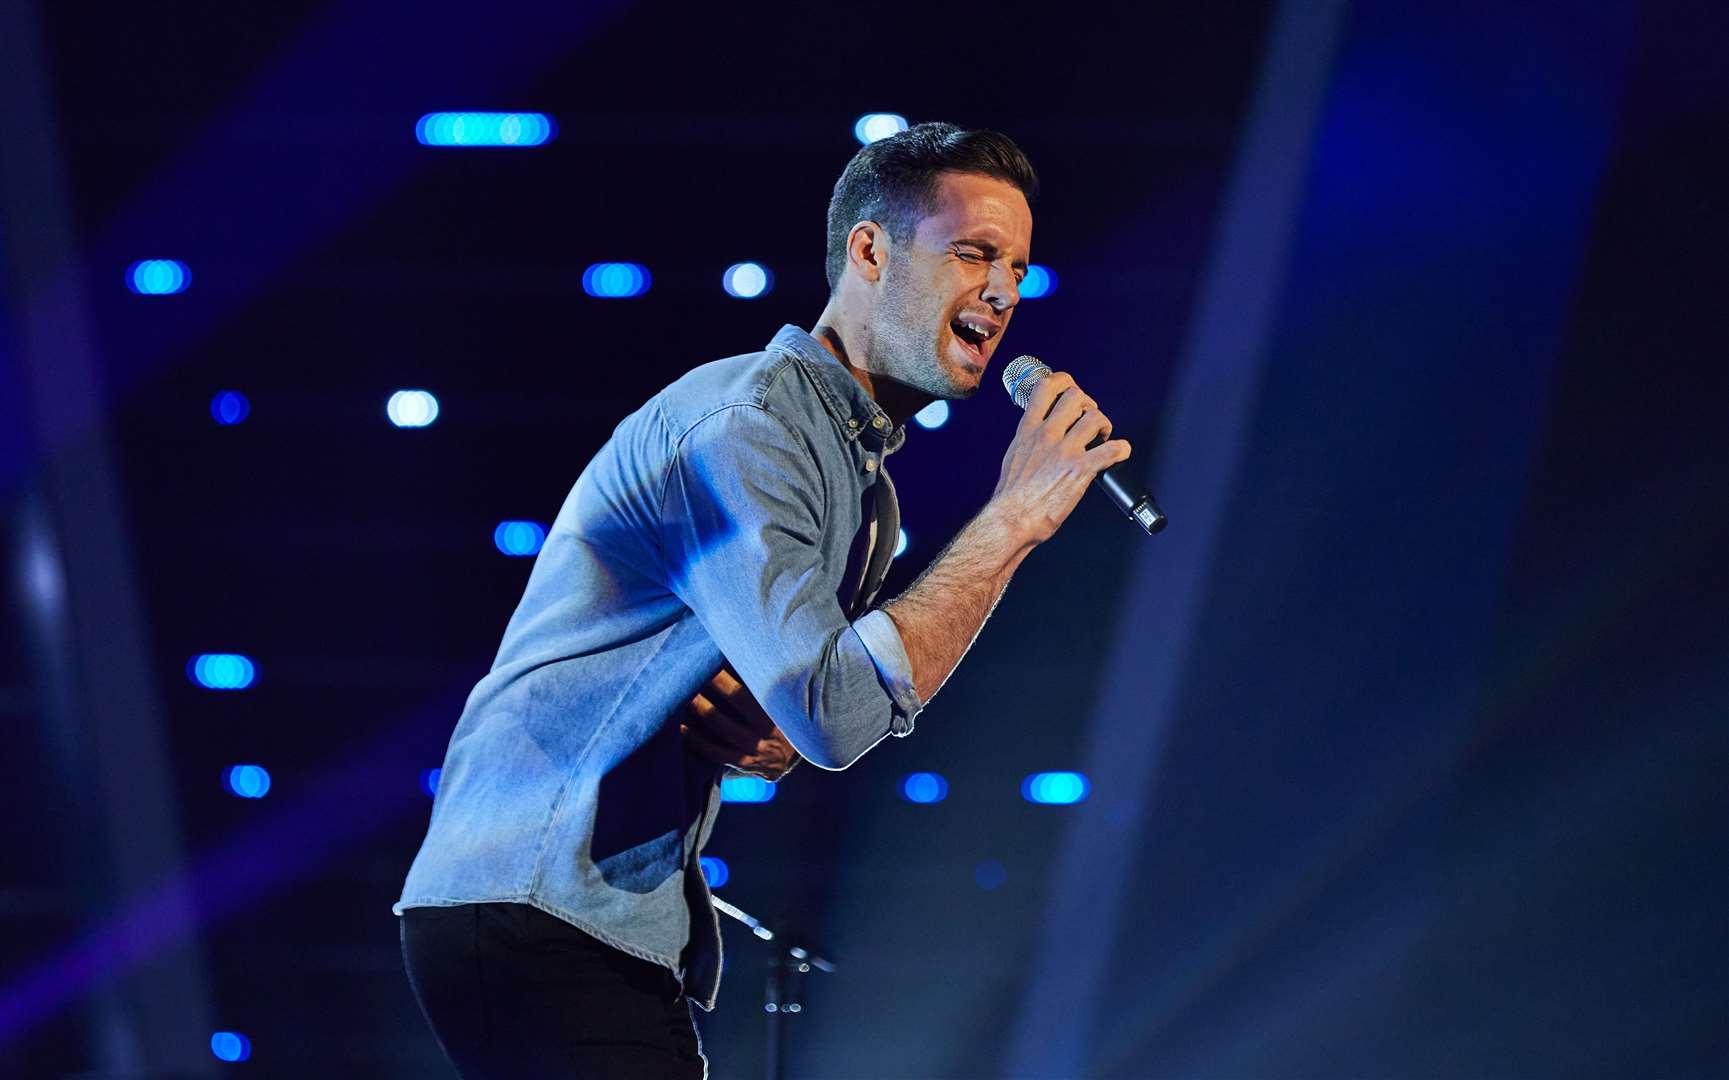 Andrew Bateup performs on The Voice tonight Picture: ITV Studios/The Voice UK